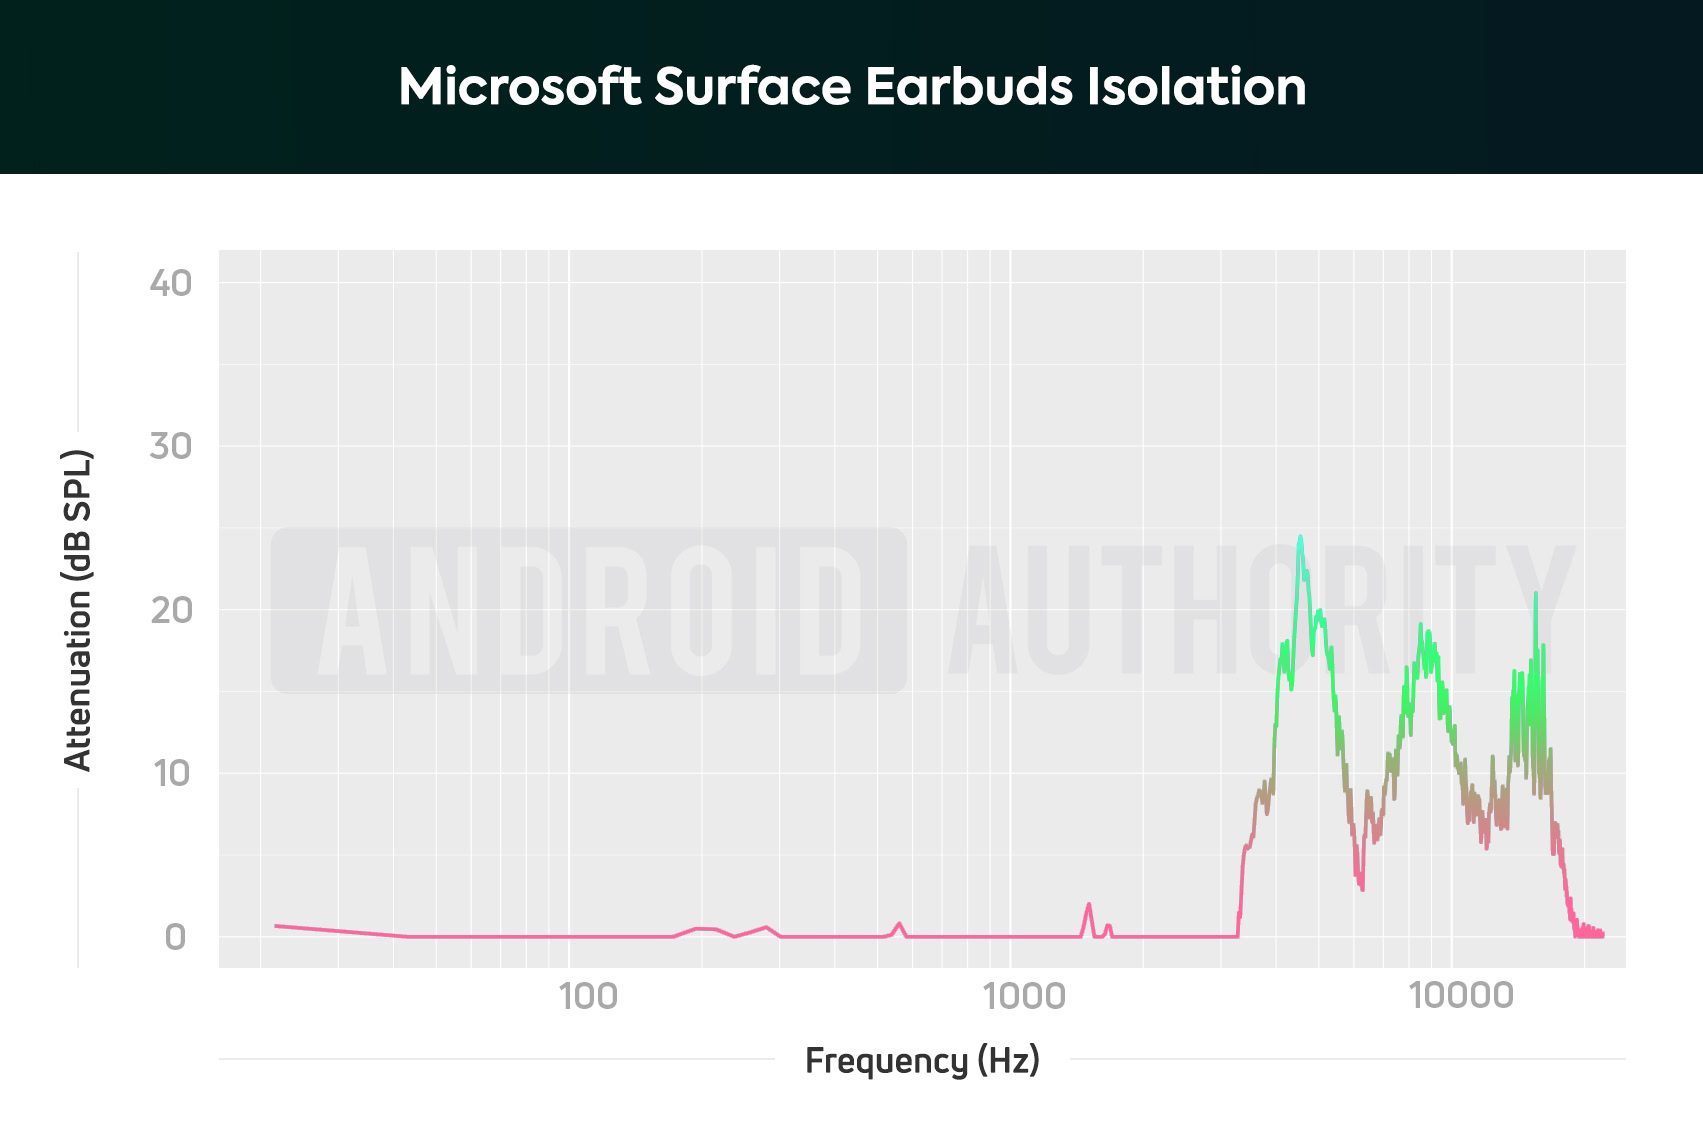 Microsoft Surface Earbuds AA isolation chart